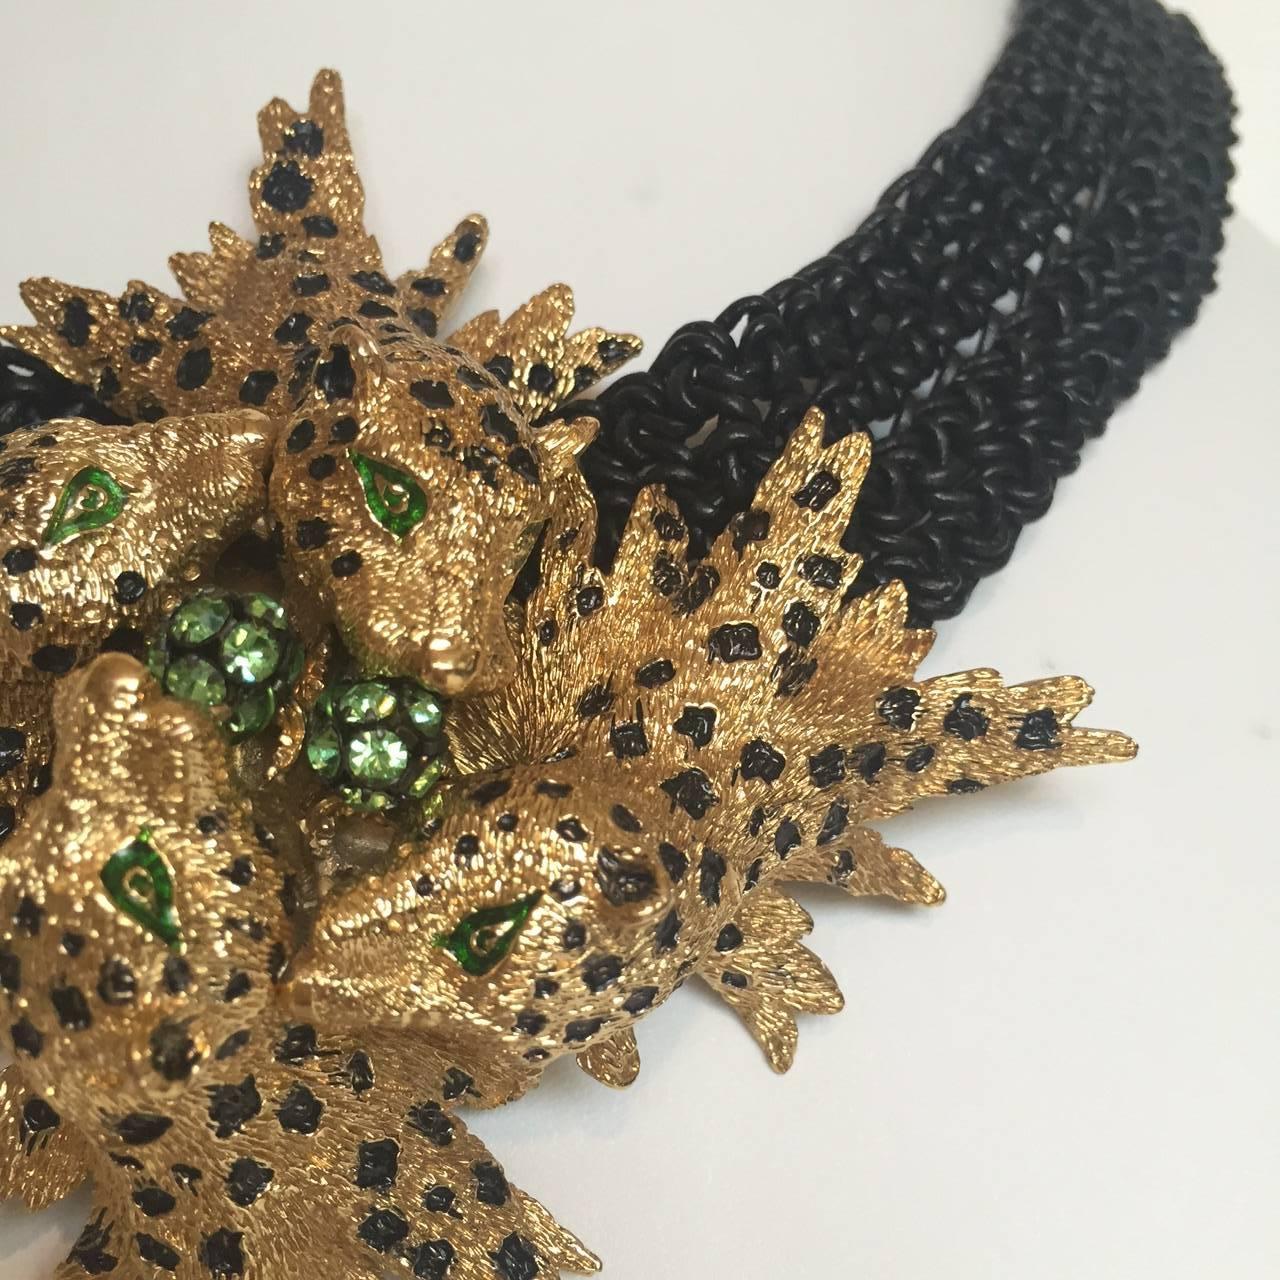 VNG Couture - Green Eyed Gold Metal Parisian Cast Tigers Chasing Emerald Green Swarovski Cut Crystal Beads with an Adjustable Tie Back finished with Vintage Beads -

The advantage of our custom crocheted pieces is the ability to adjust the length